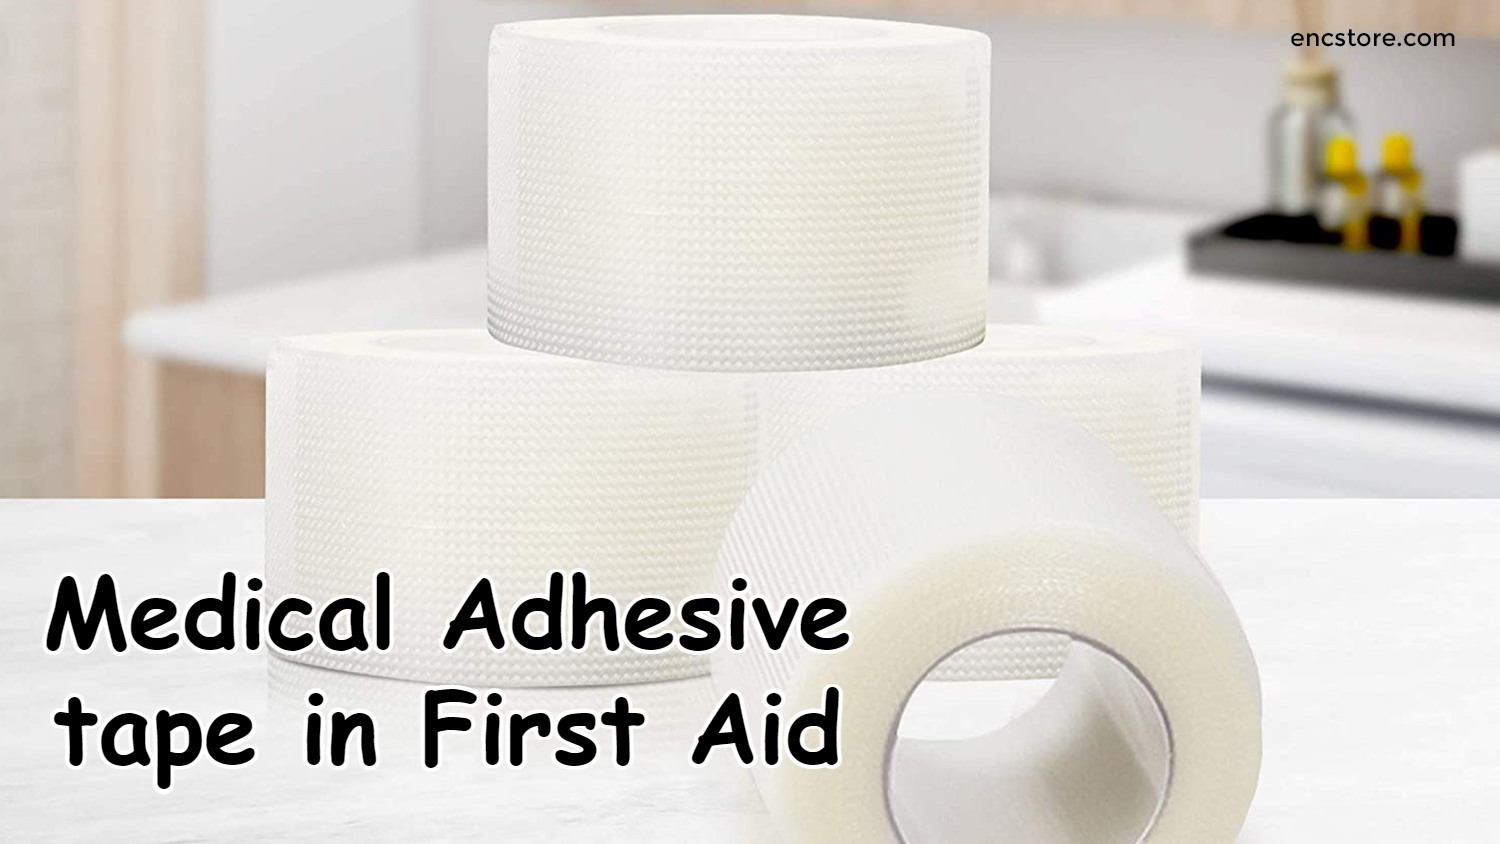 Medical Adhesive tape in First Aid